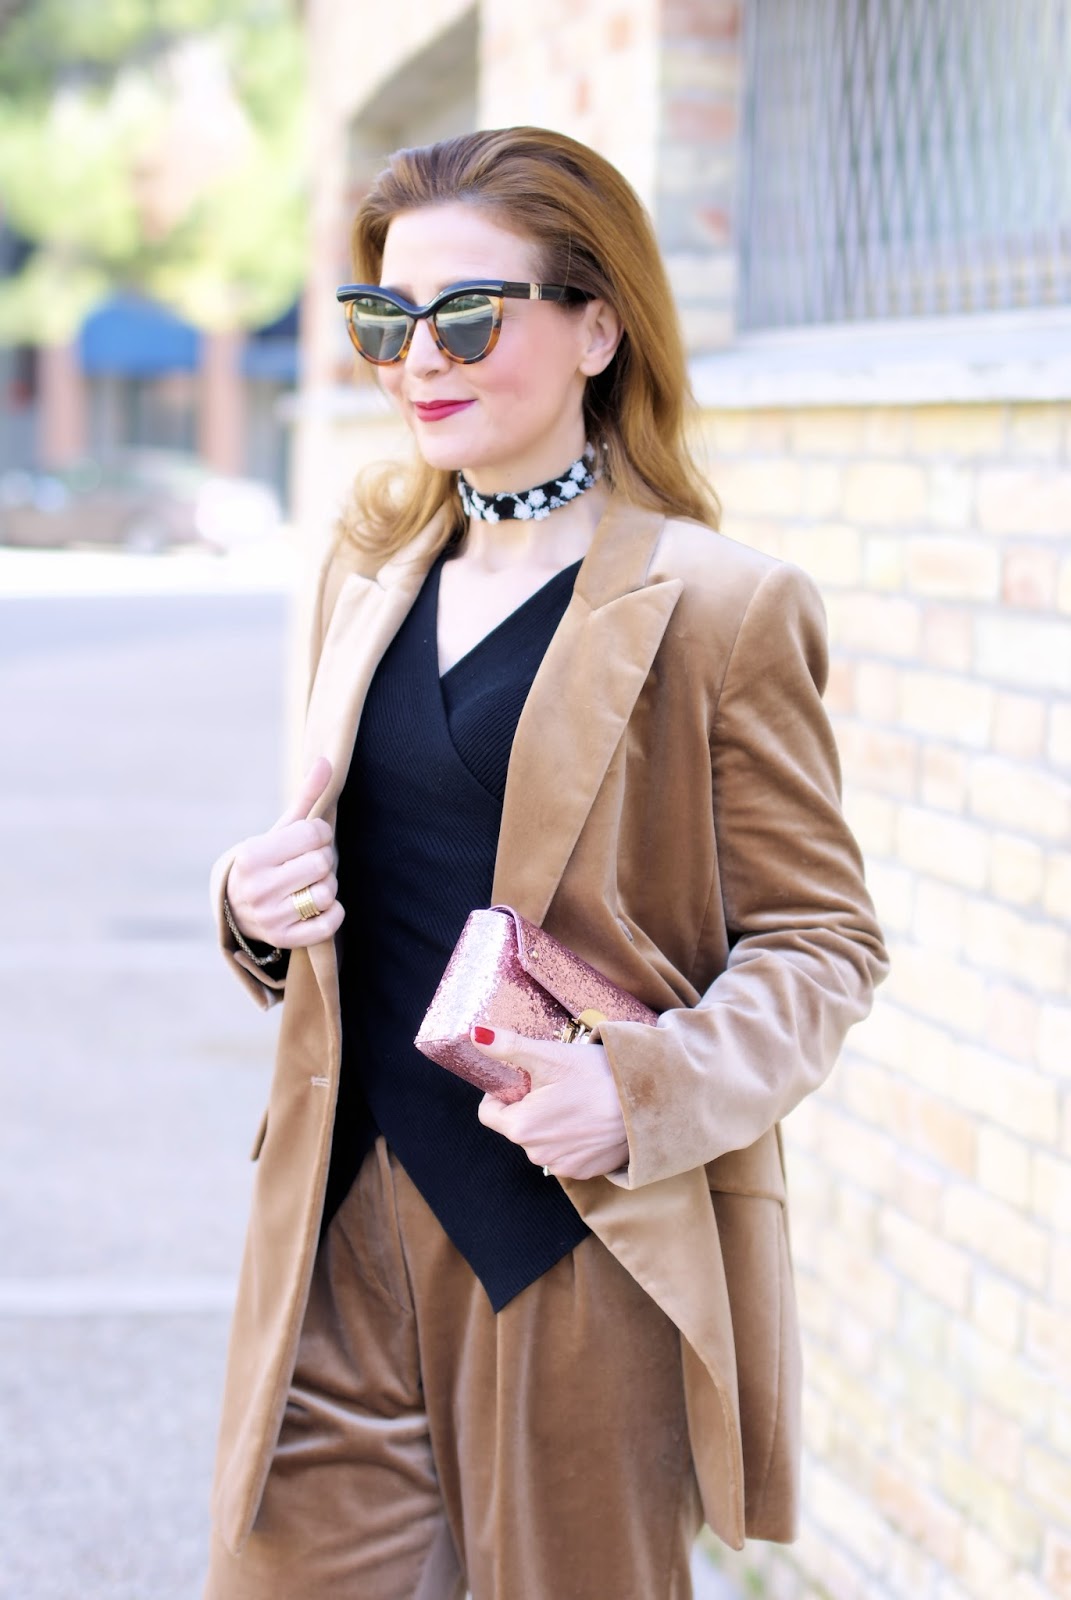 Max Mara velvet suit and RYinNYC lace choker on Fashion and Cookies fashion blog, fashion blogger style